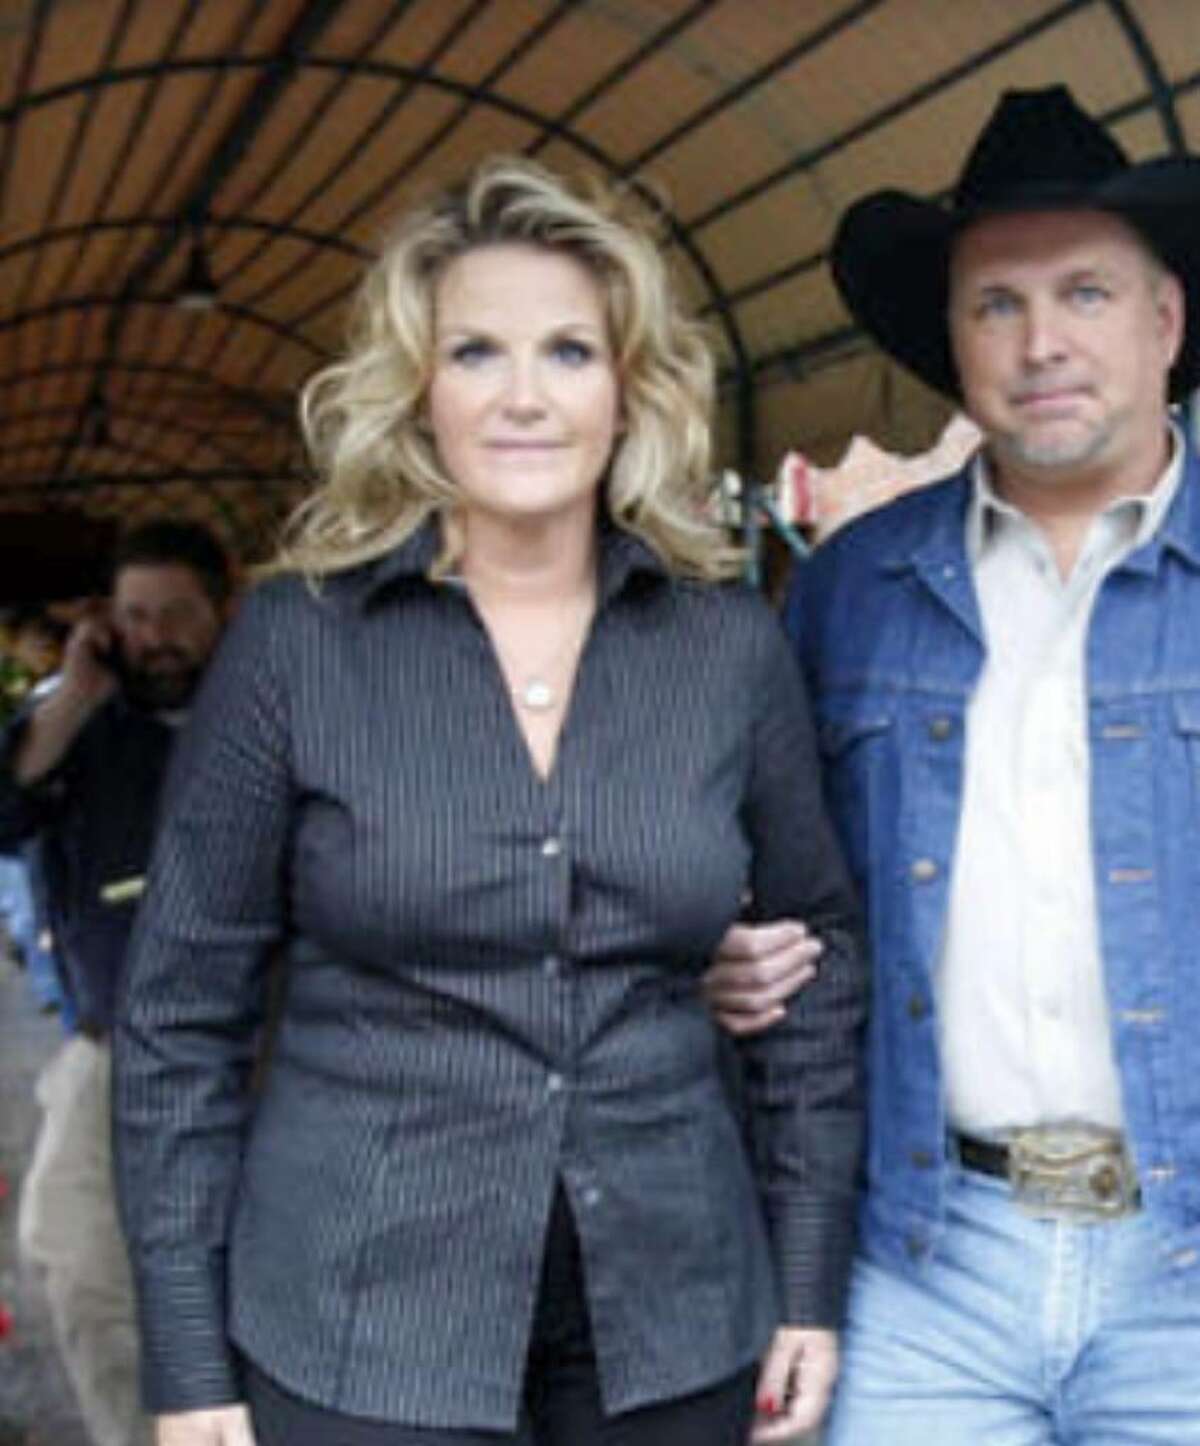 “An icon for all parents”: That's how one reader views country music star Garth Brooks, with wife and fellow performer Trisha Yearwood.